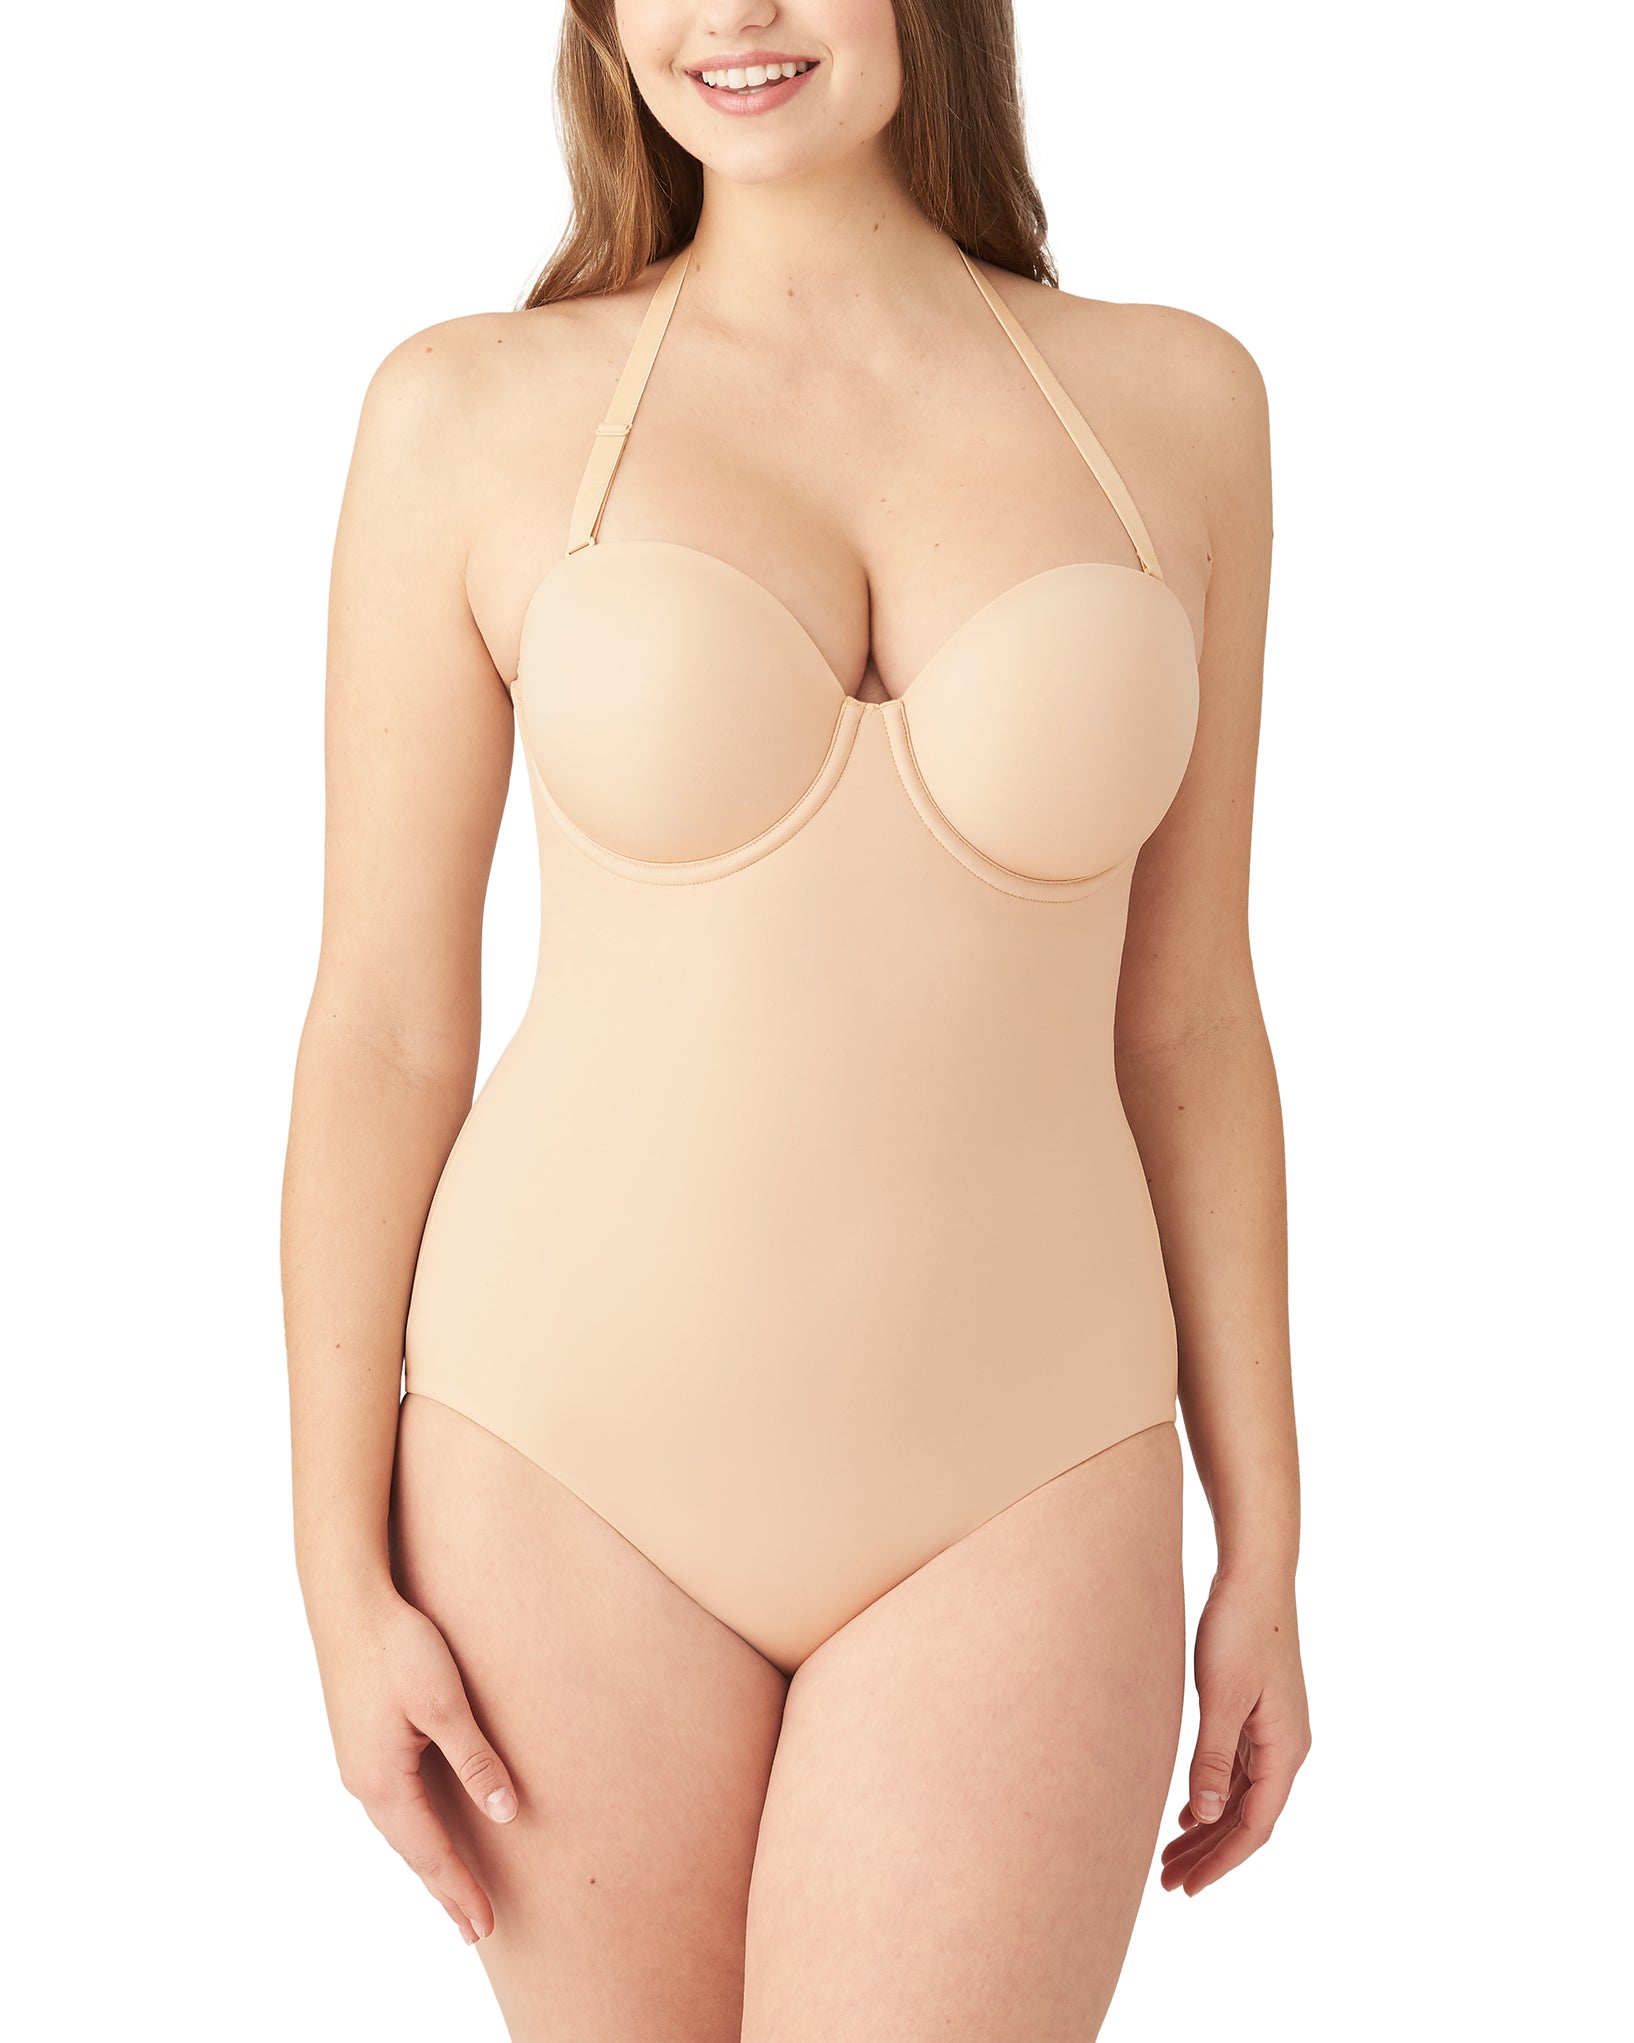 Wacoal Red Carpet Strapless Body Briefer (More colors available) - 801 –  Blum's Swimwear & Intimate Apparel